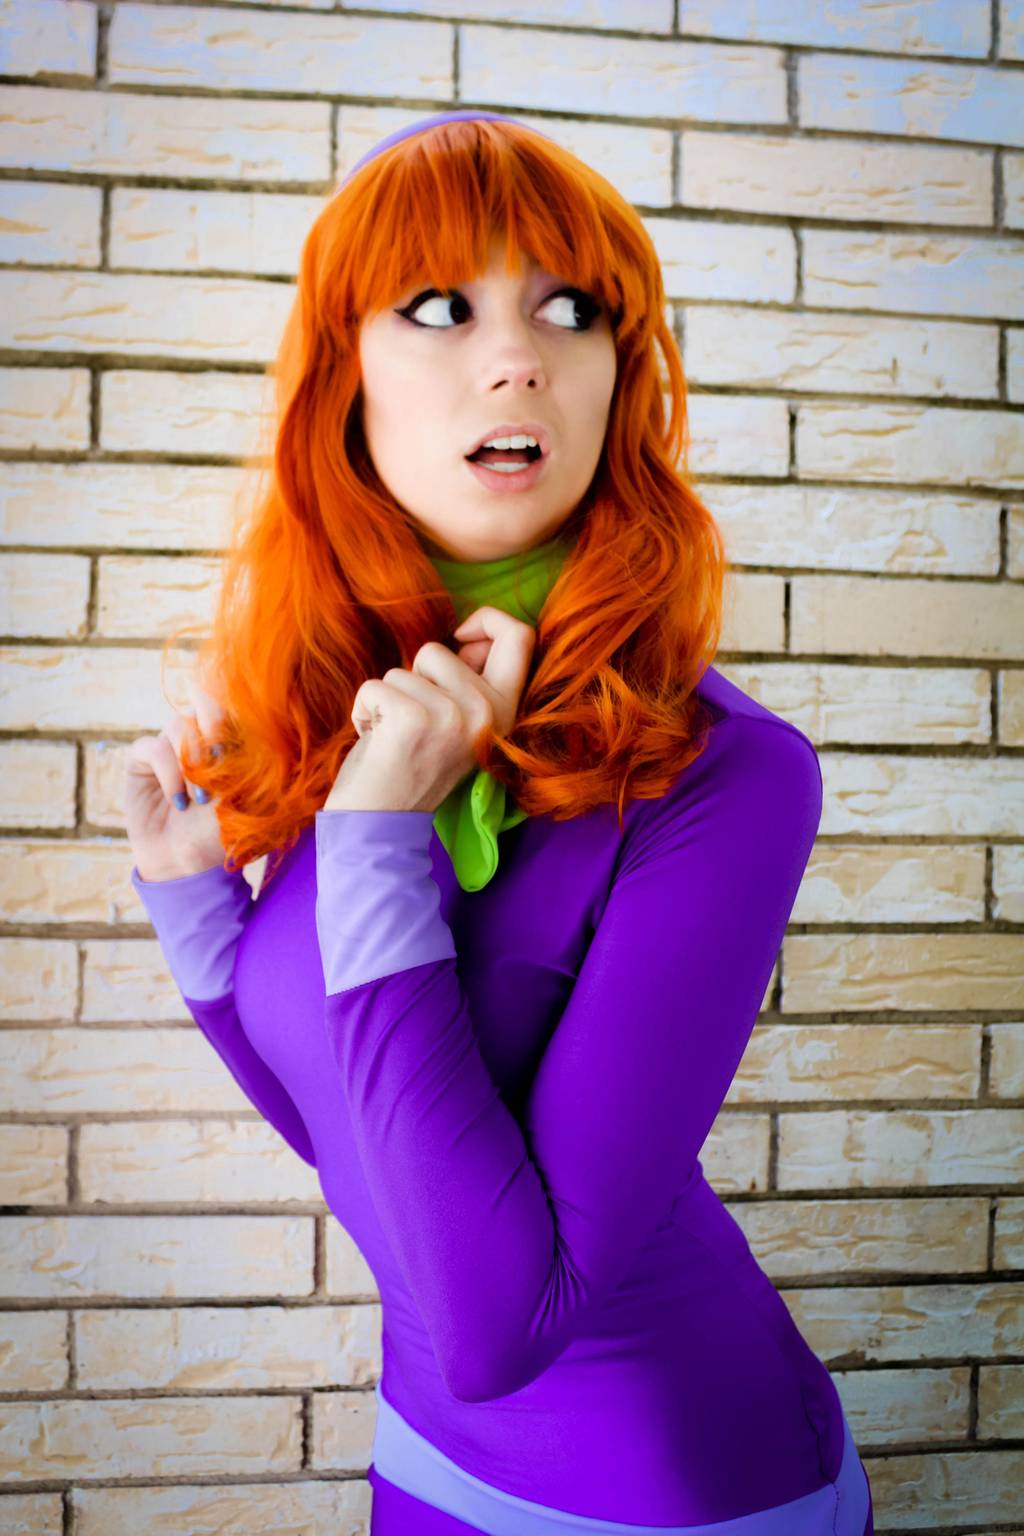 70+ Hot Pictures Of Daphne Blake From Scooby Doo Which Are Sure to Catch Your Attention 17